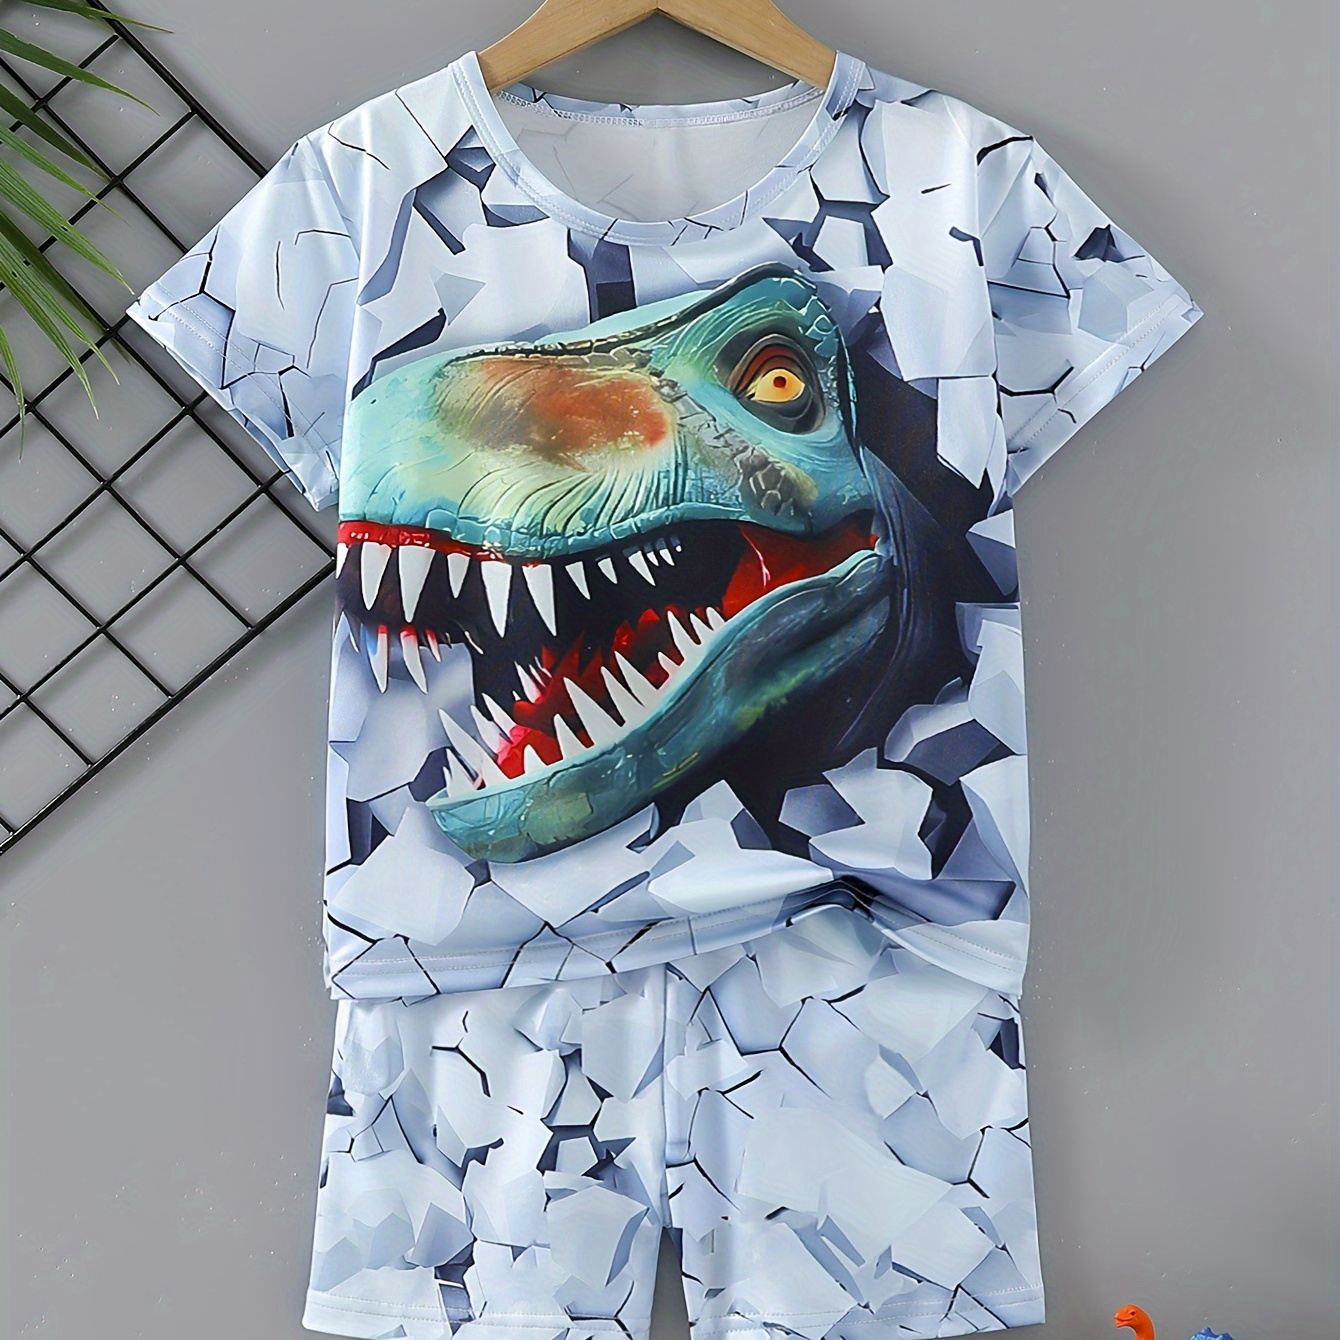 

2pcs Boy's Cartoon Dino Print Short-sleeve Outfit, Easter Day Boys Outfit, Crew Neck T-shirt & Comfy Shorts Set, Boys Clothes For Summer